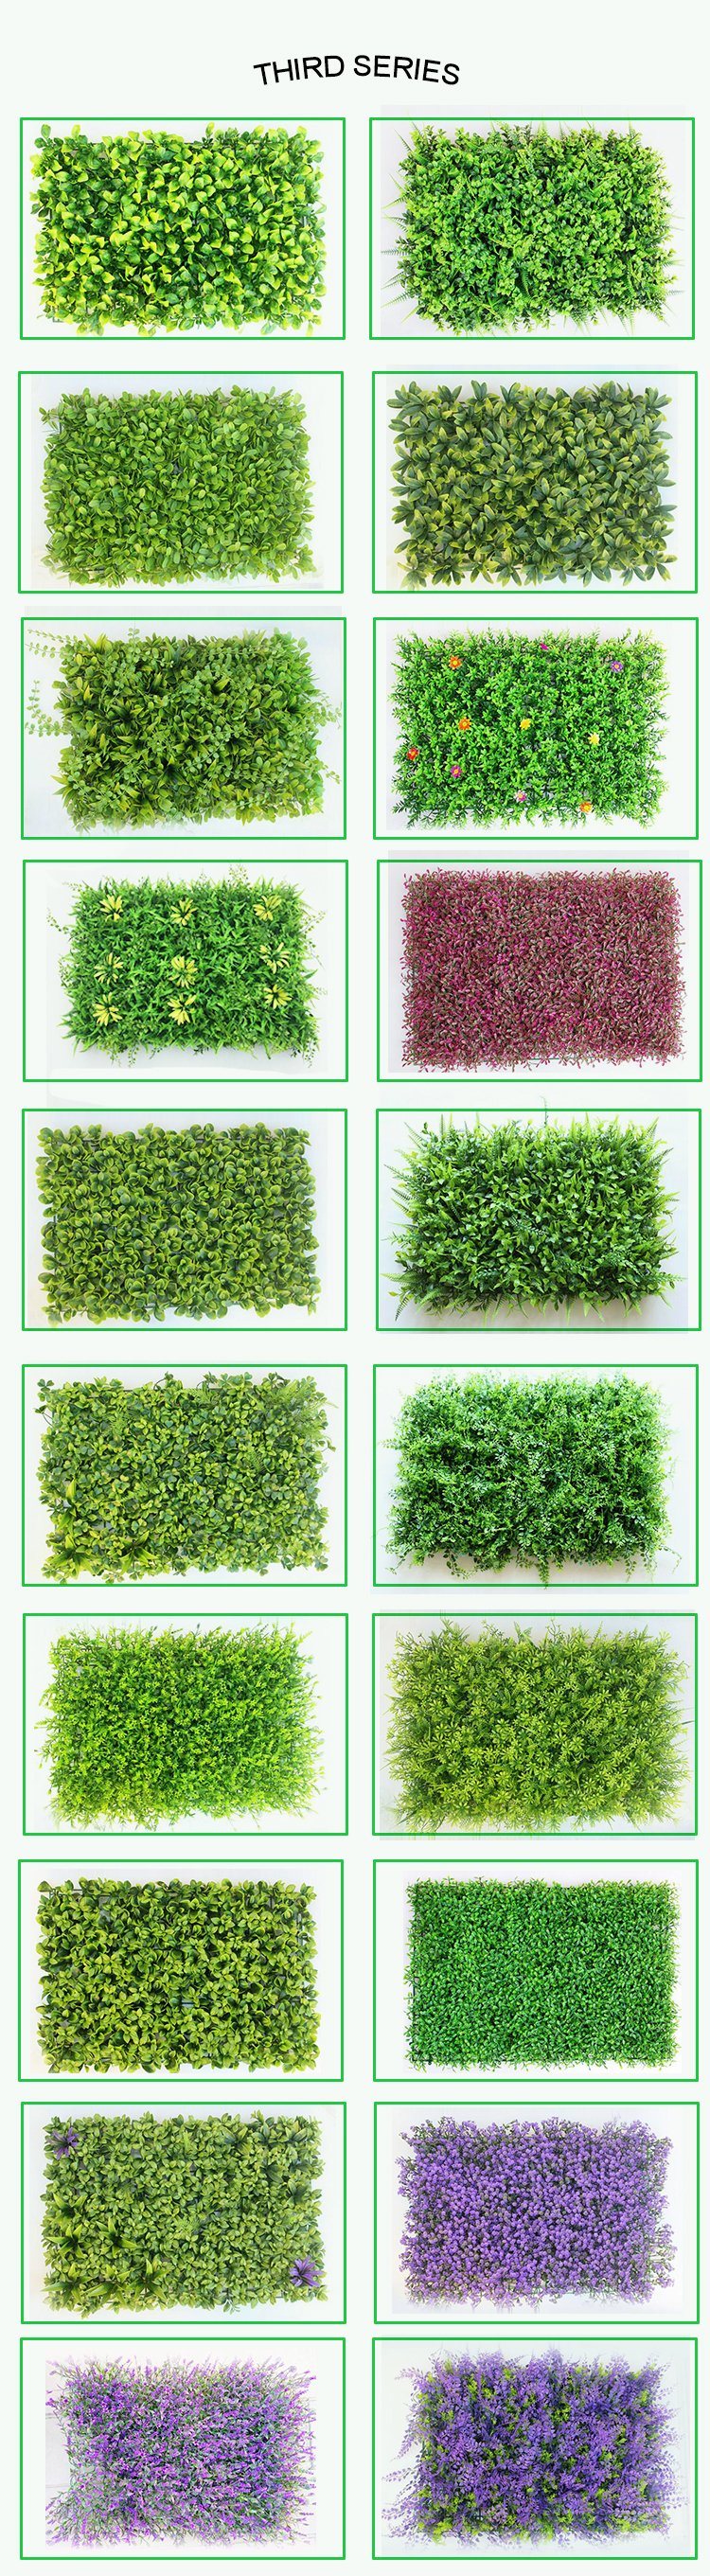 Landscape Artificial Plastic Green Leaves Fence Boxwood Hedge Artificial IVY Fence for Decorative Garden